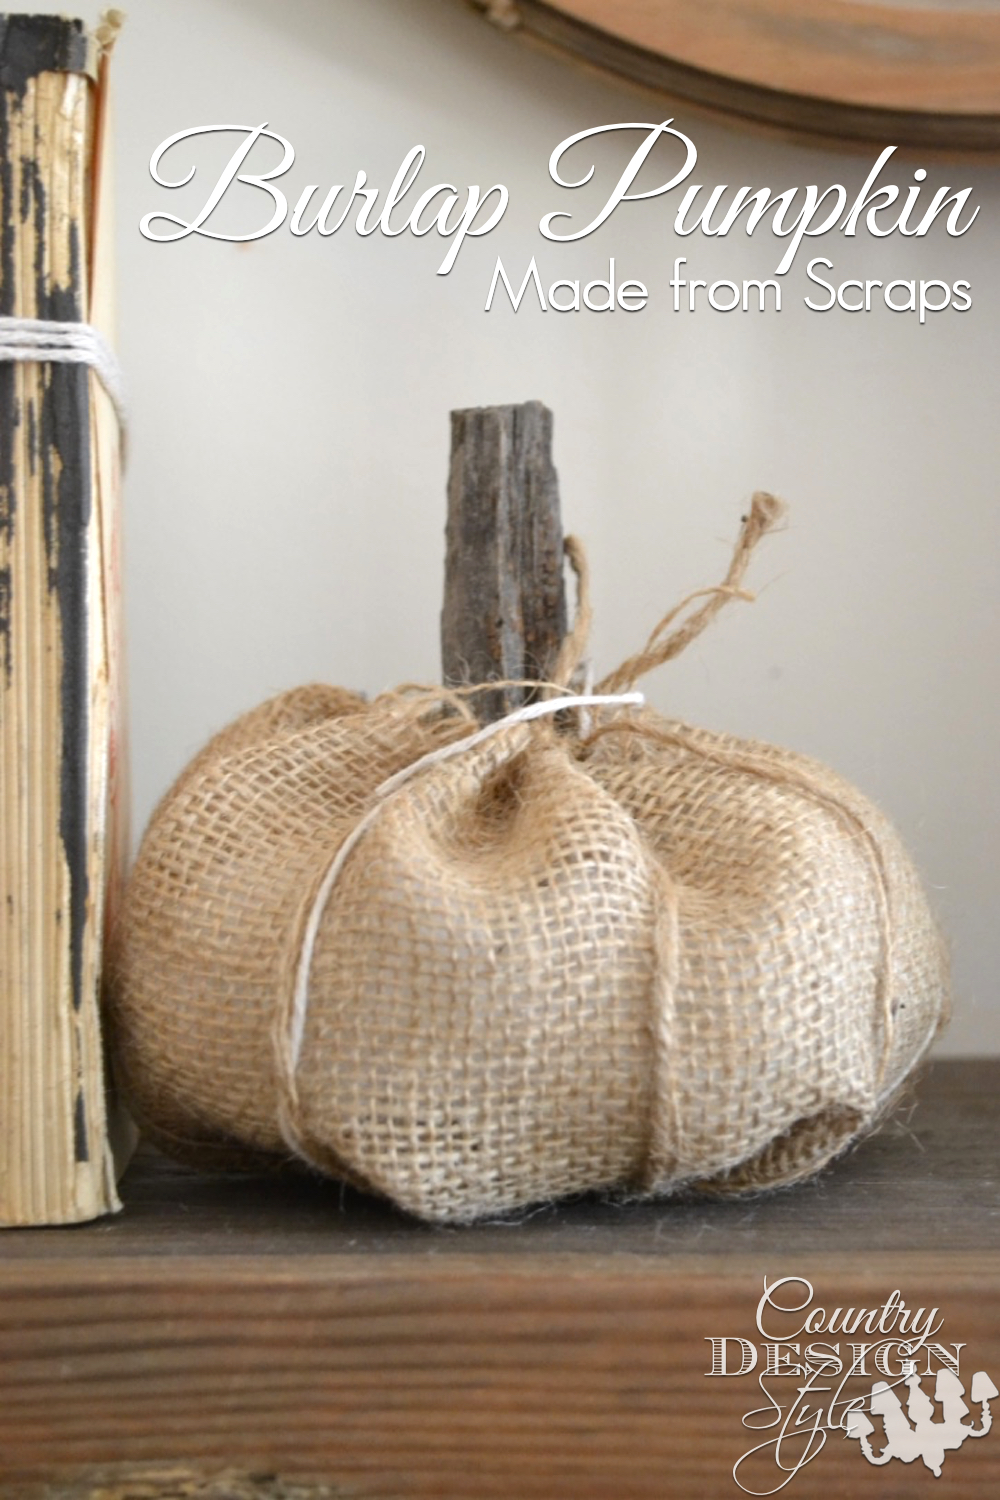 How to make a quick burlap pumpkin using scraps for you fall decorating ideas. Country Design Style www.countrydesignstyle.com